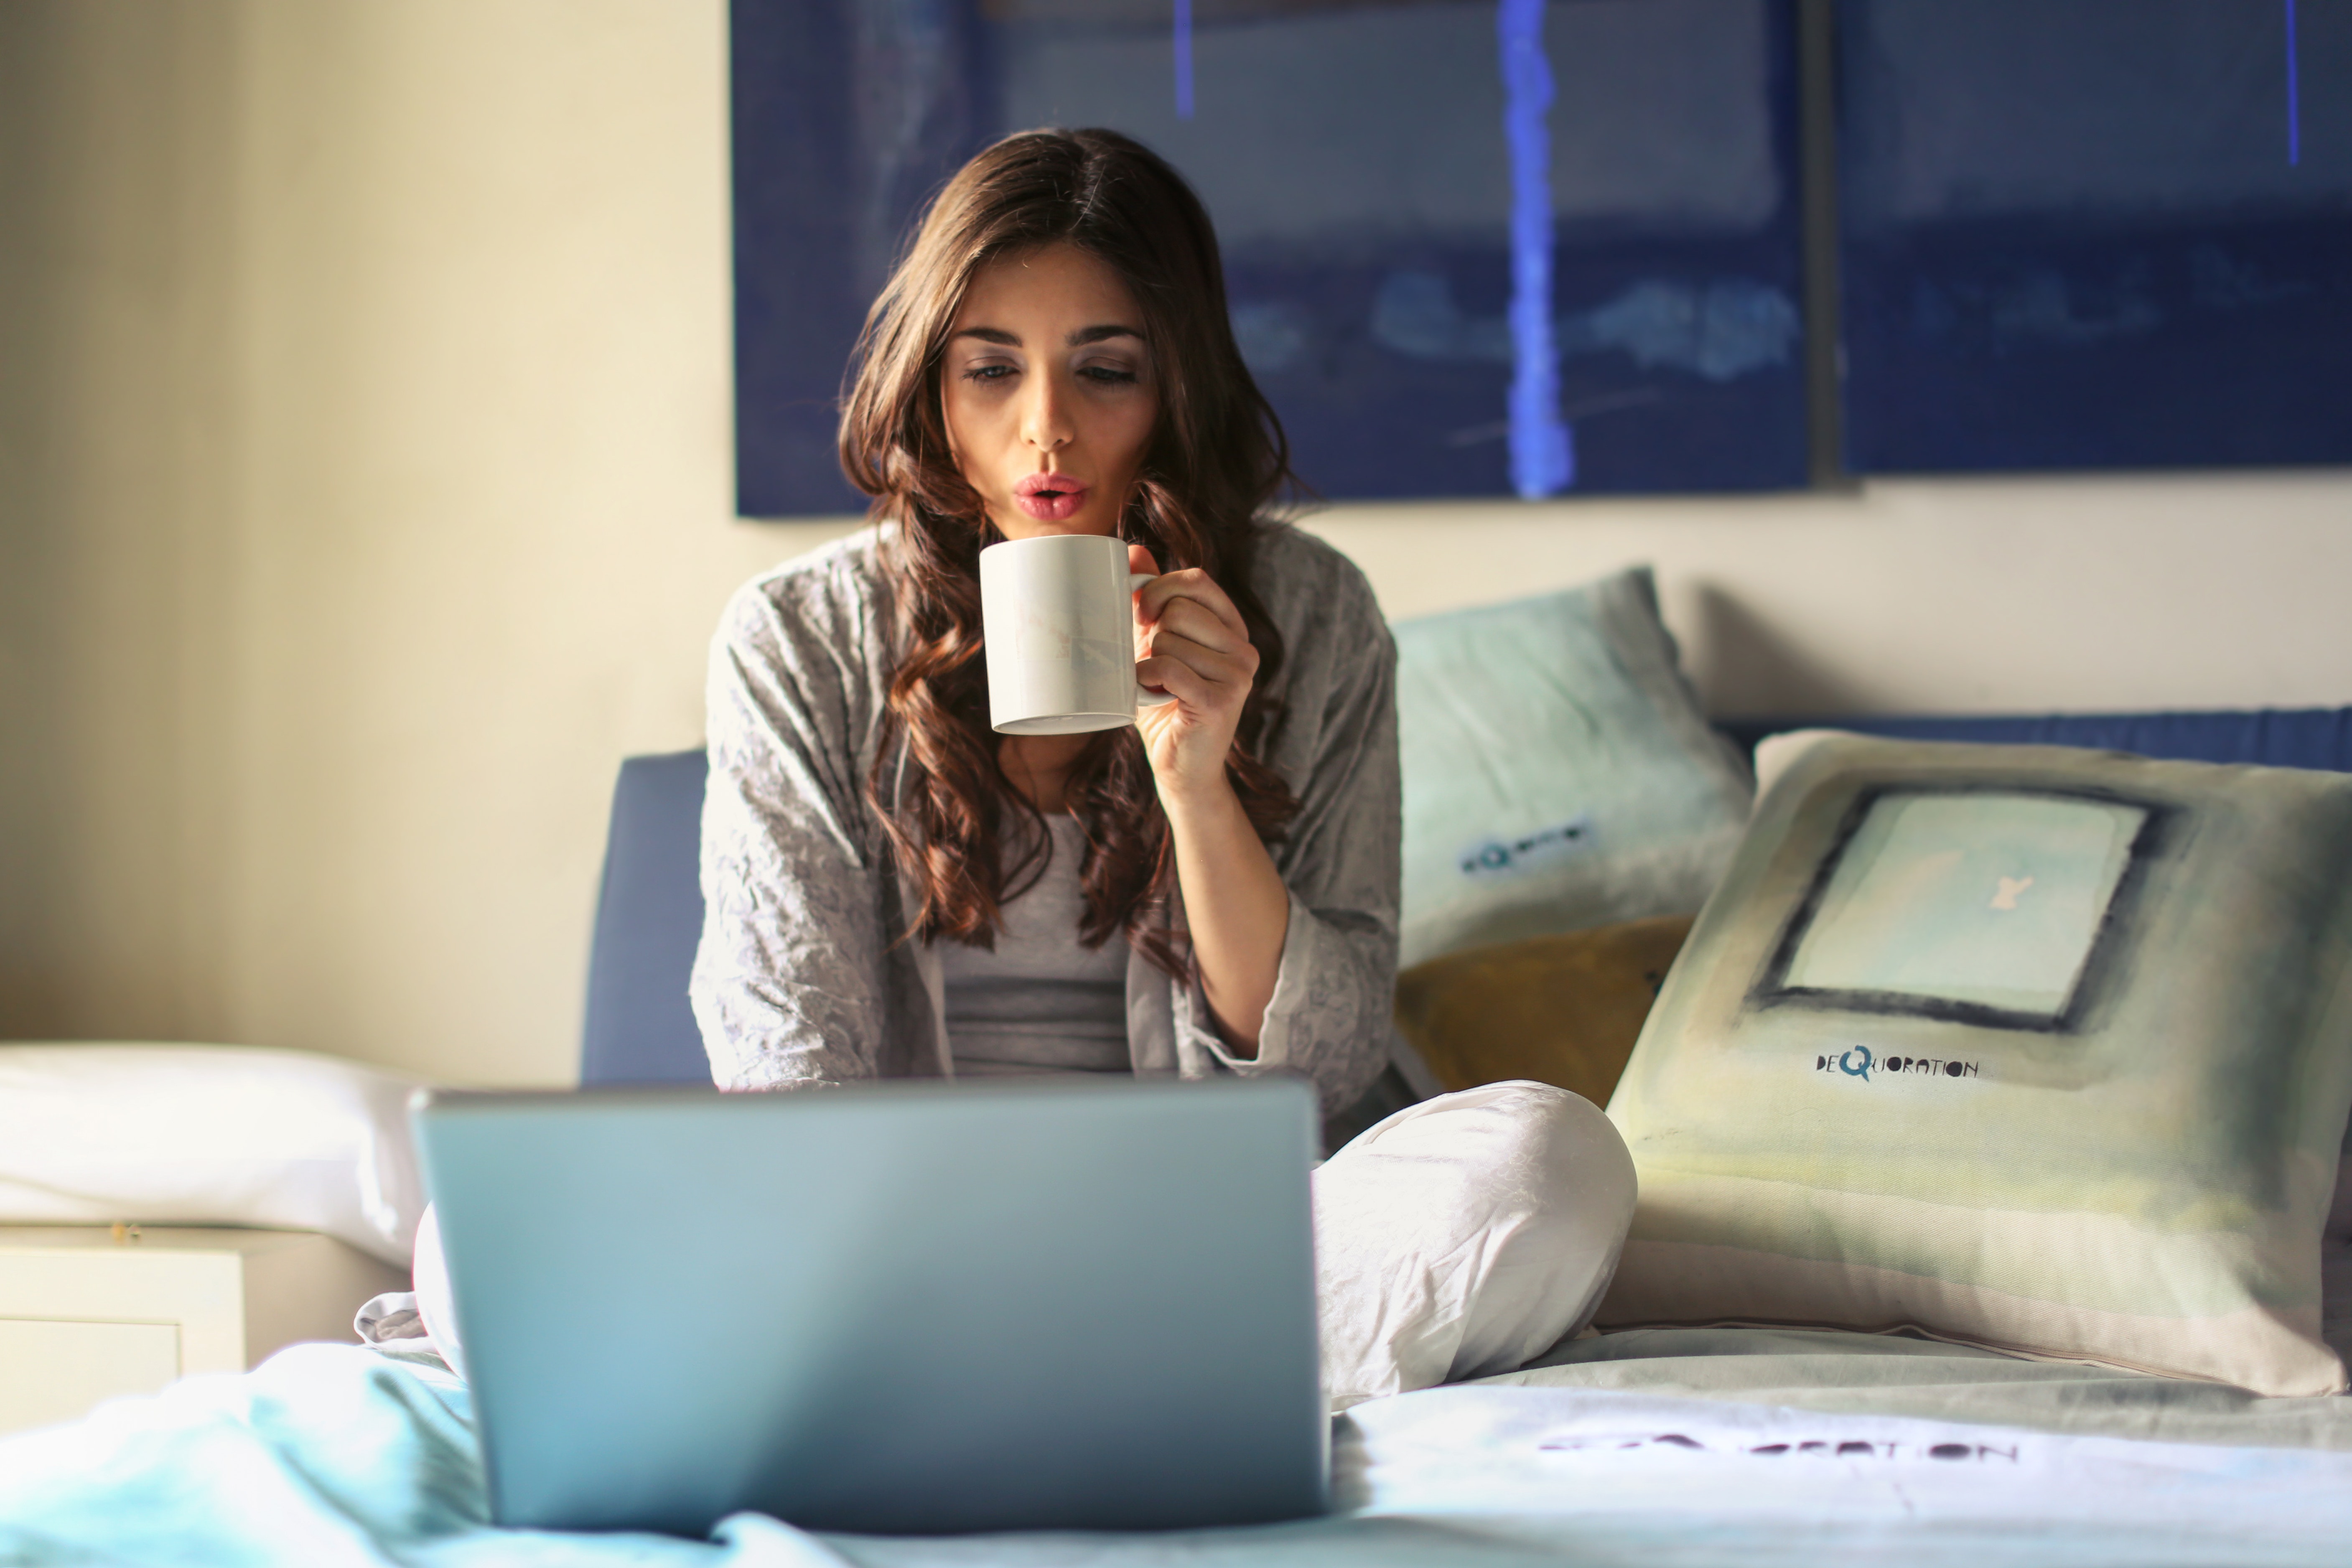 Woman in Grey Jacket Sits on Bed Uses Grey Laptop, Home, Work, Woman, Technology, HQ Photo